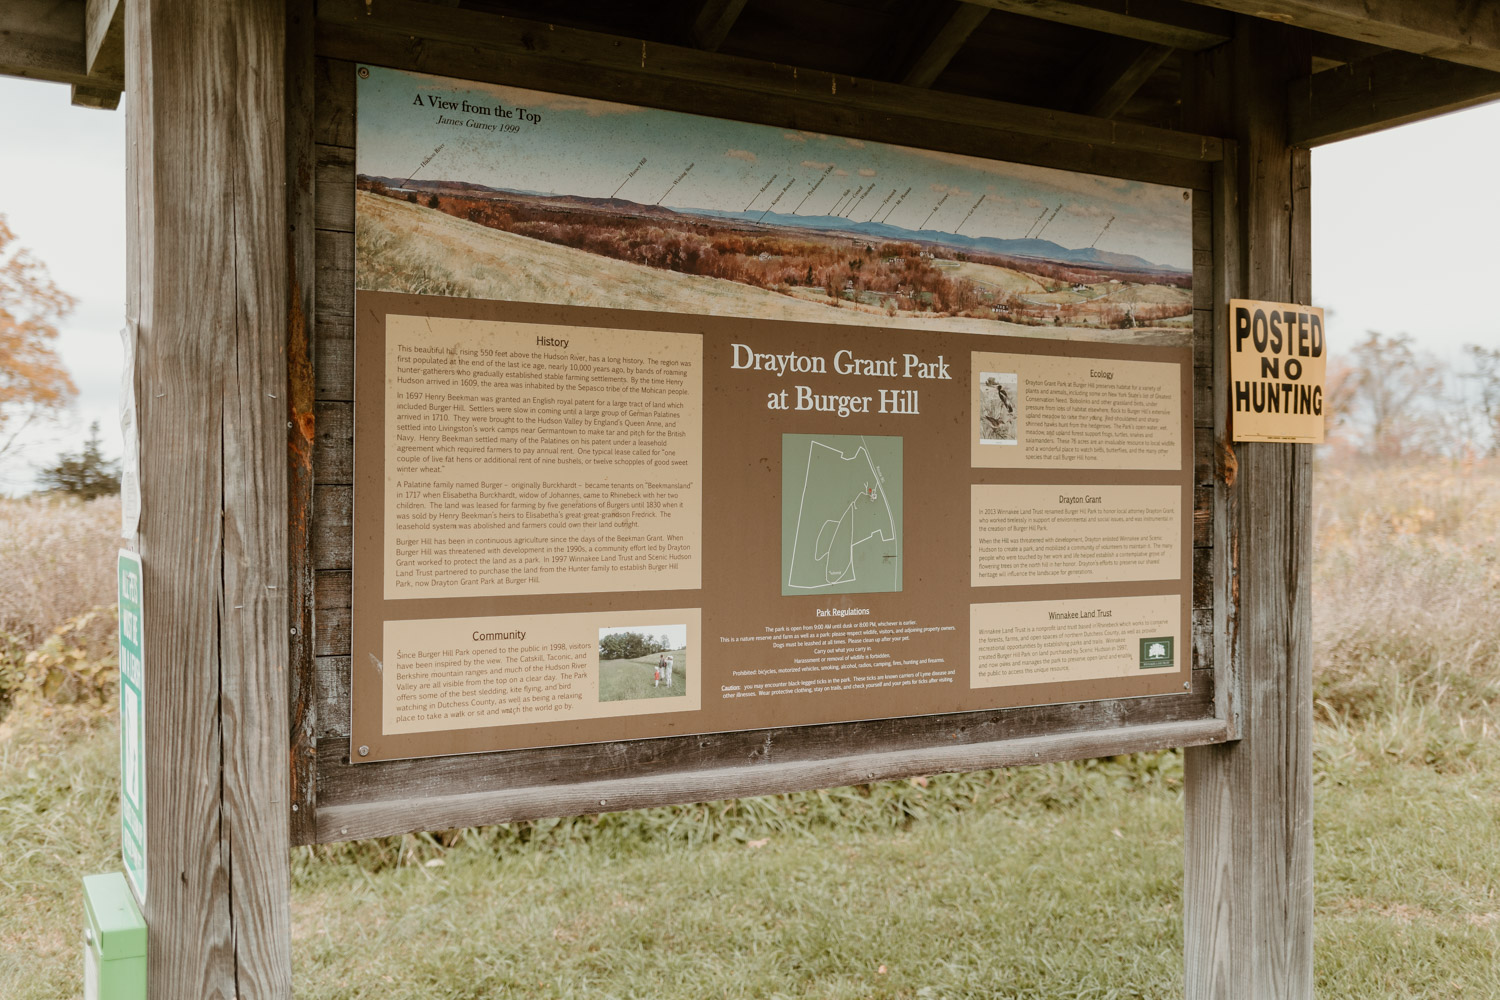 An informational sign at Drayton Grant Park at Burger Hill detailing the park's history, ecology, and community involvement, with an overview image of the landscape at the top and a "Posted No Hunting" sign to the right.